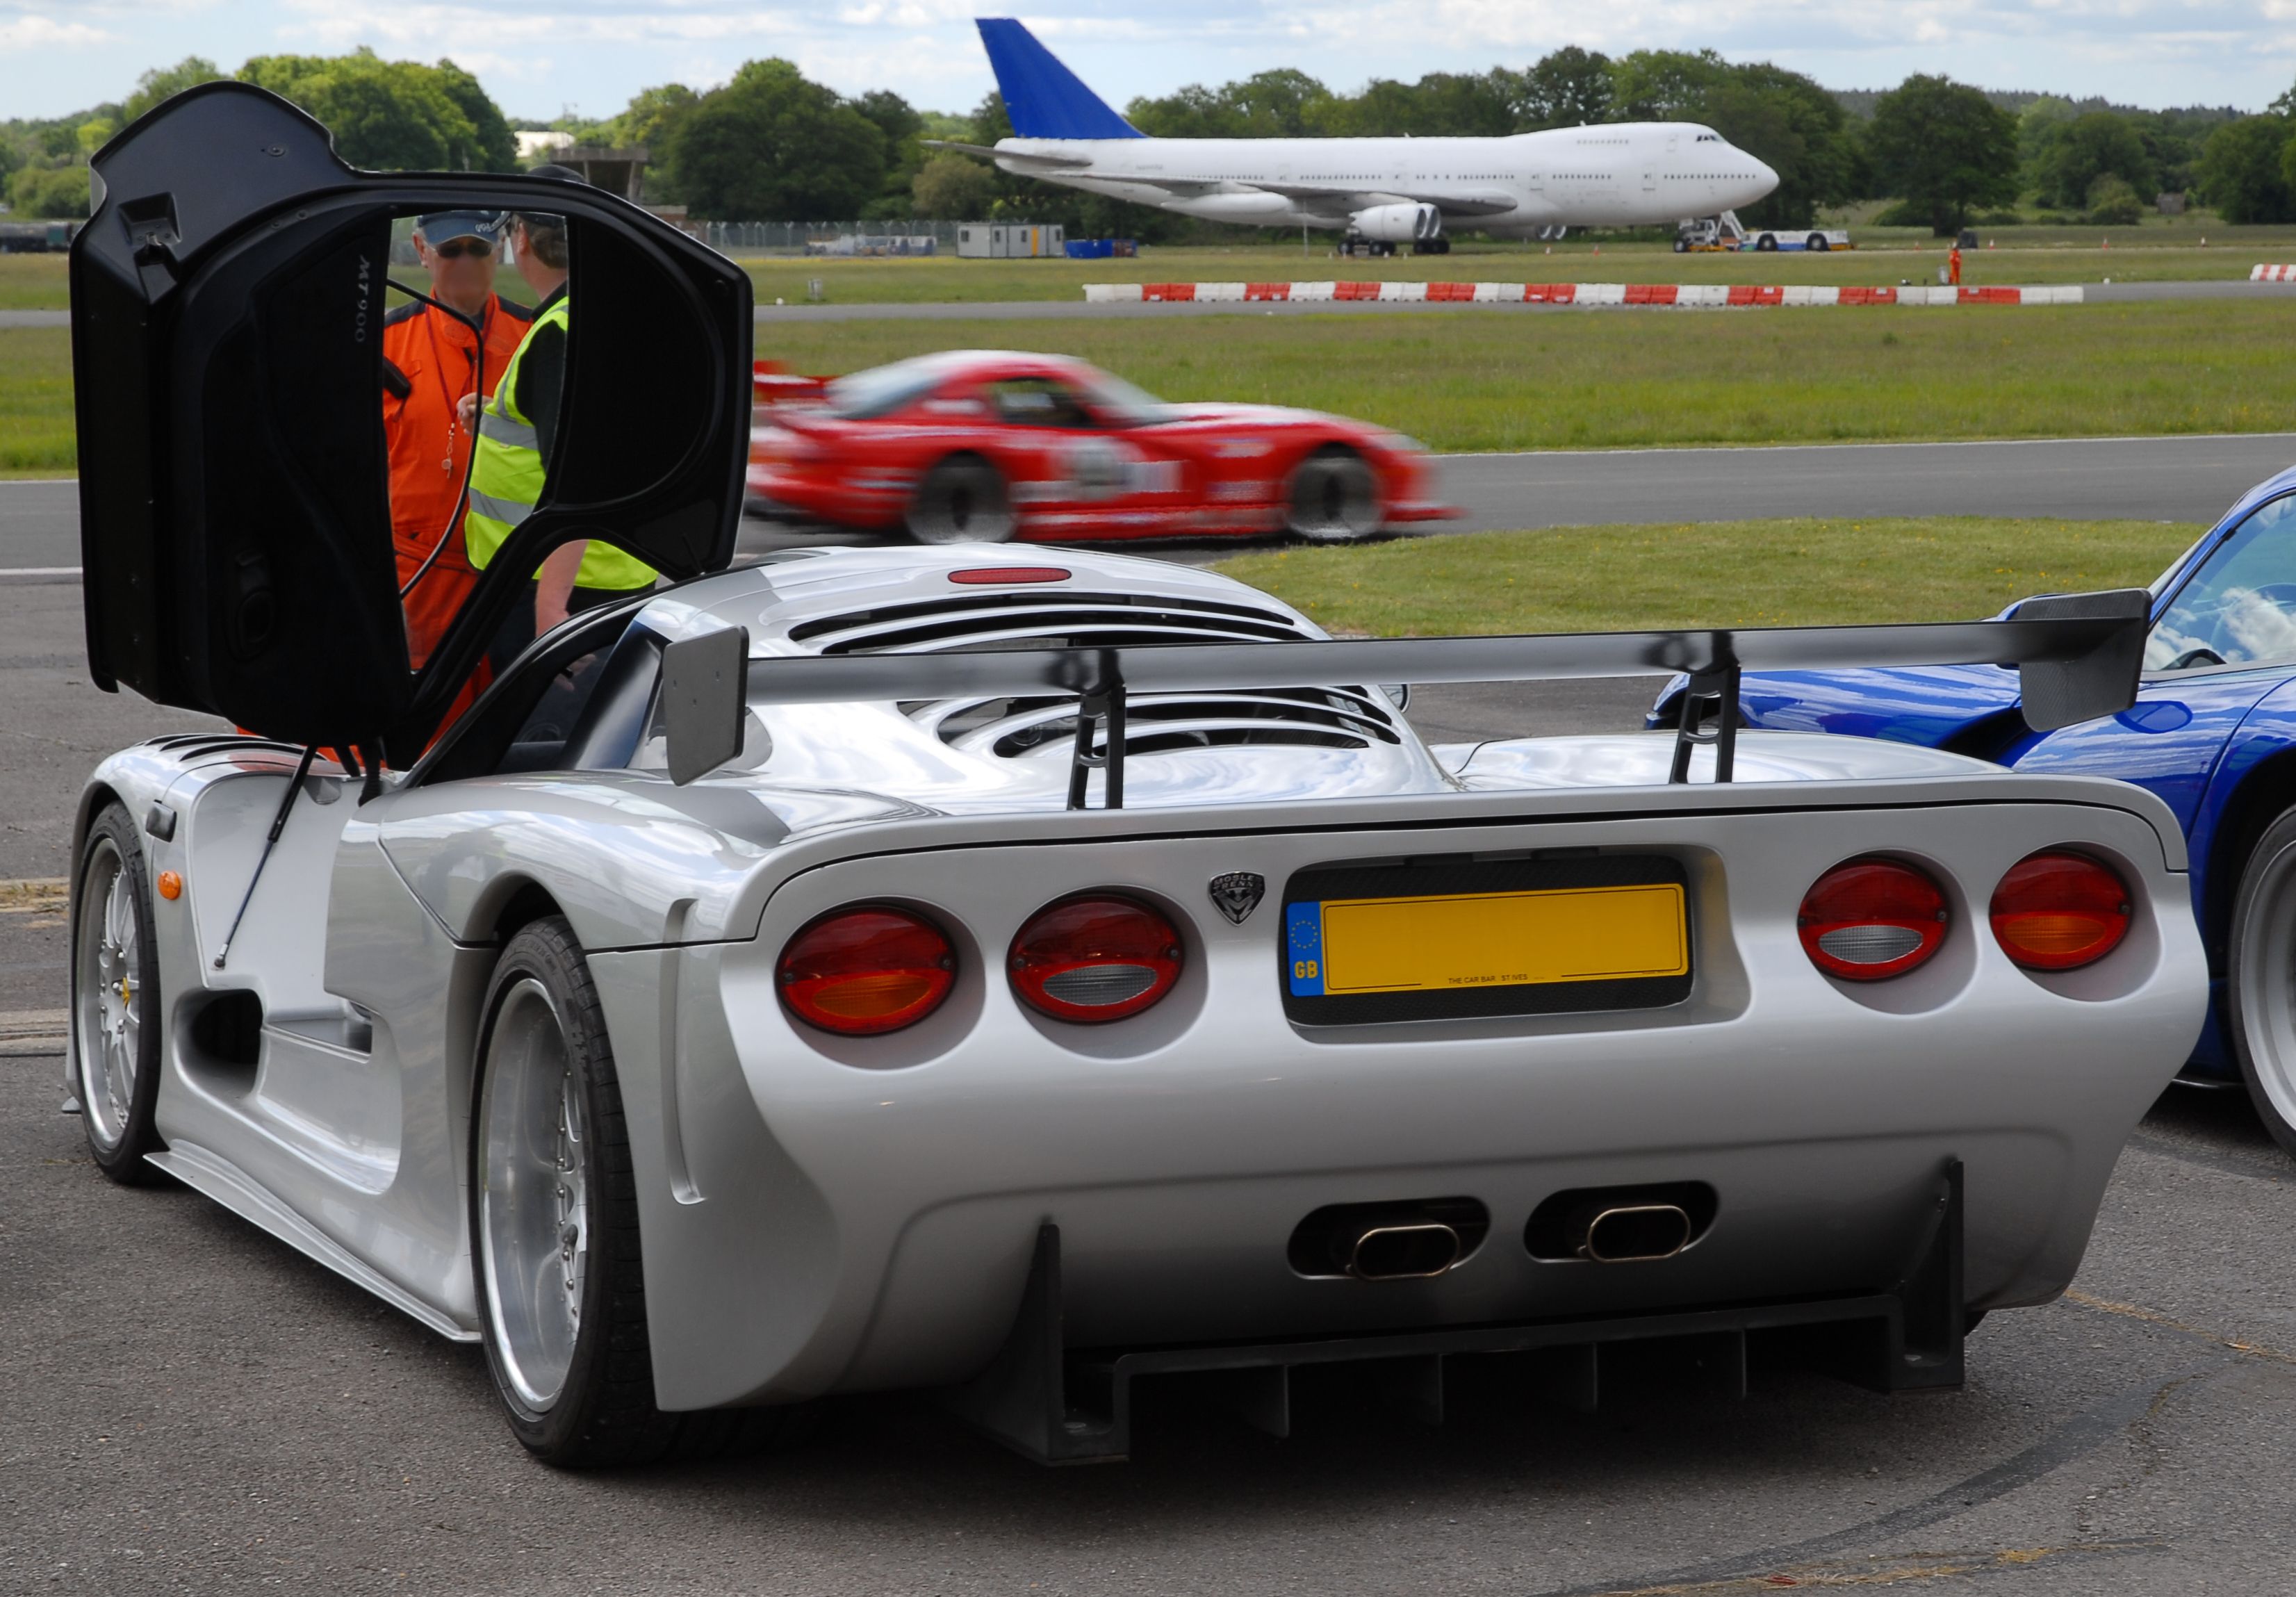 Exotic supercars and a Boeing 747 at the Dunsfold aerodrome.